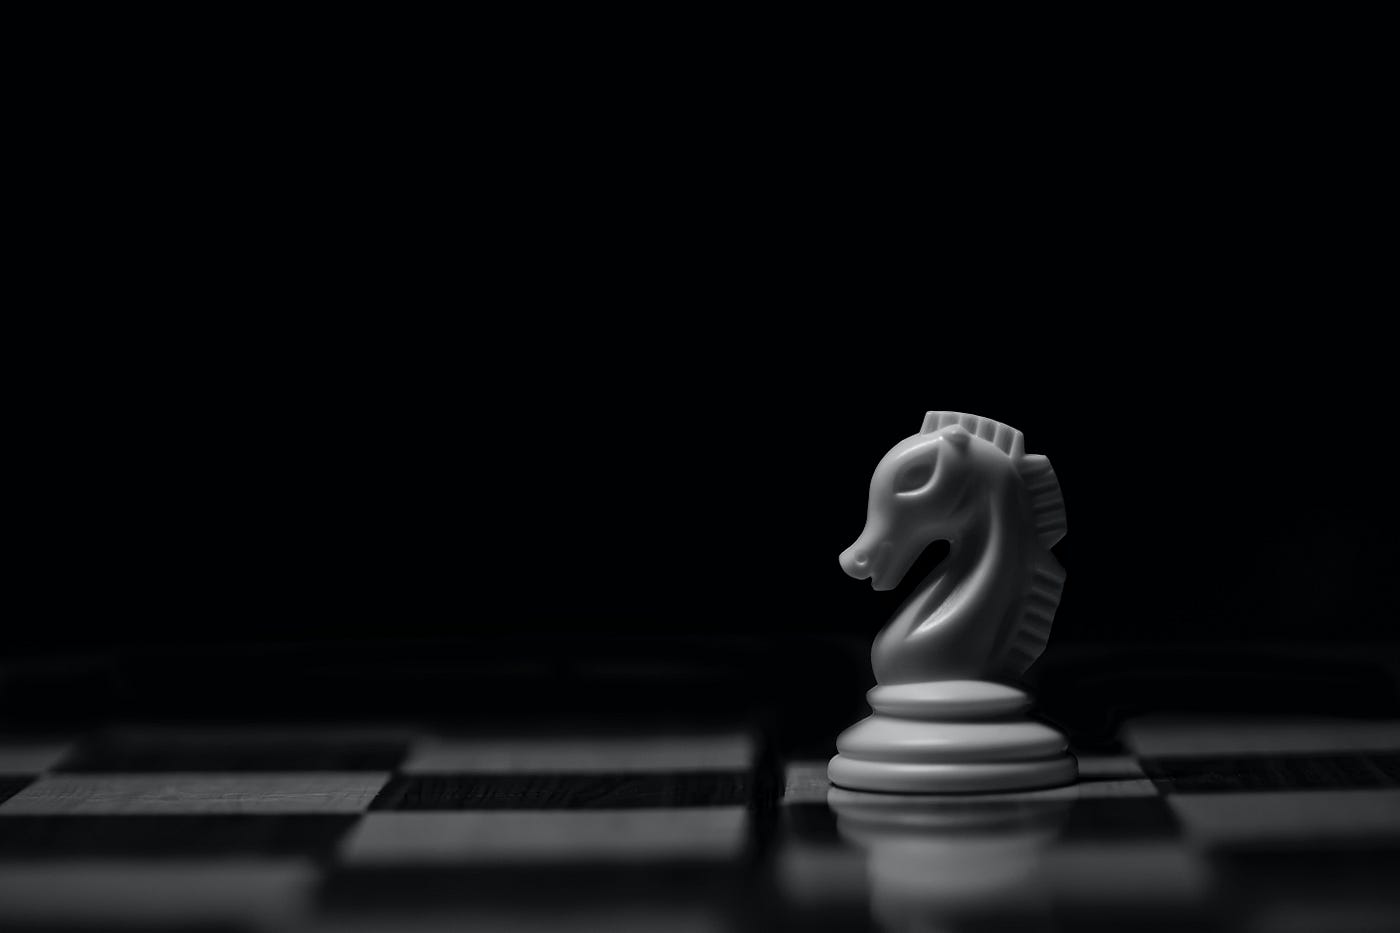 Is there any way in which the white can still win this chess game against  the black 2700 Elo computer? - Quora